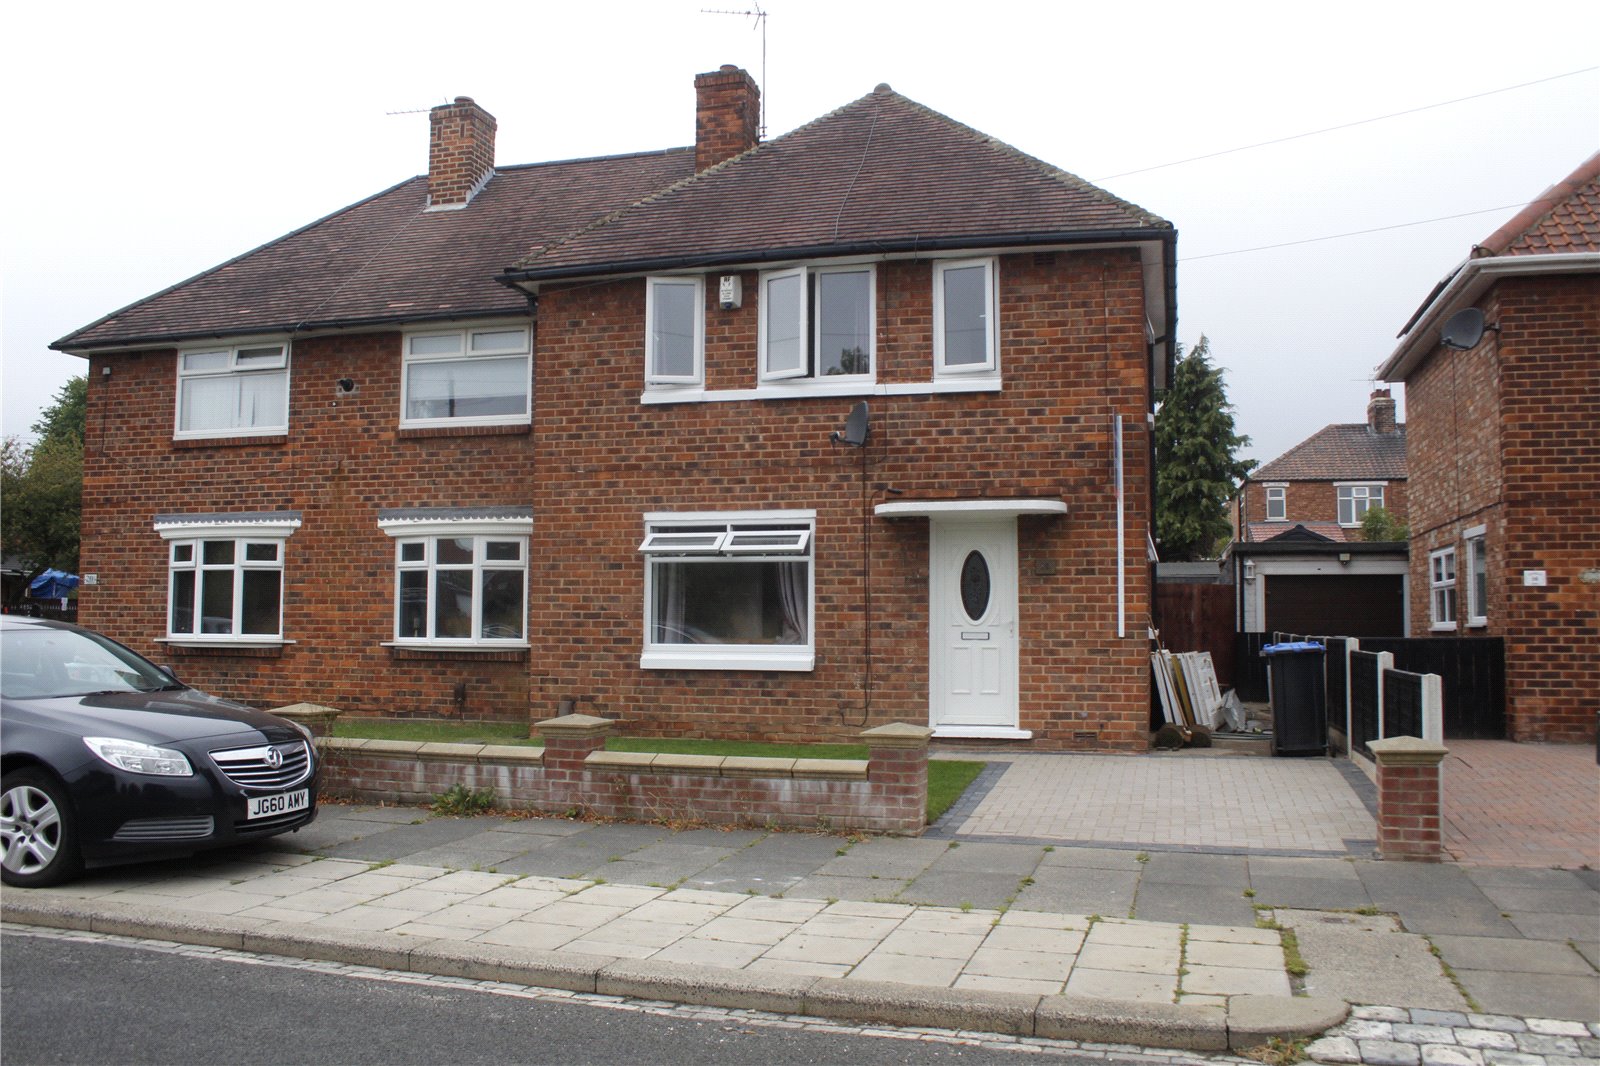 3 bed house for sale  - Property Image 1